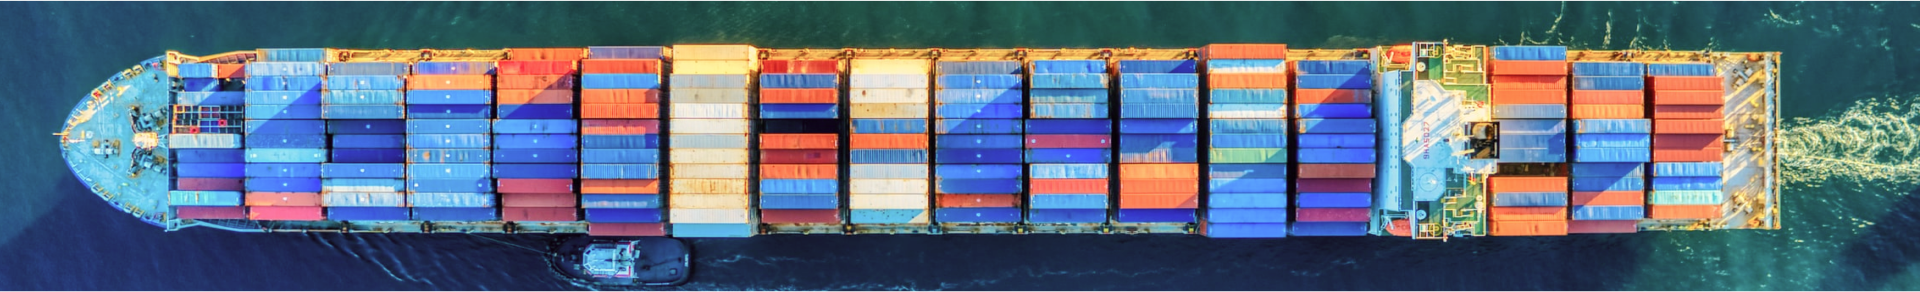 A ship full of containers